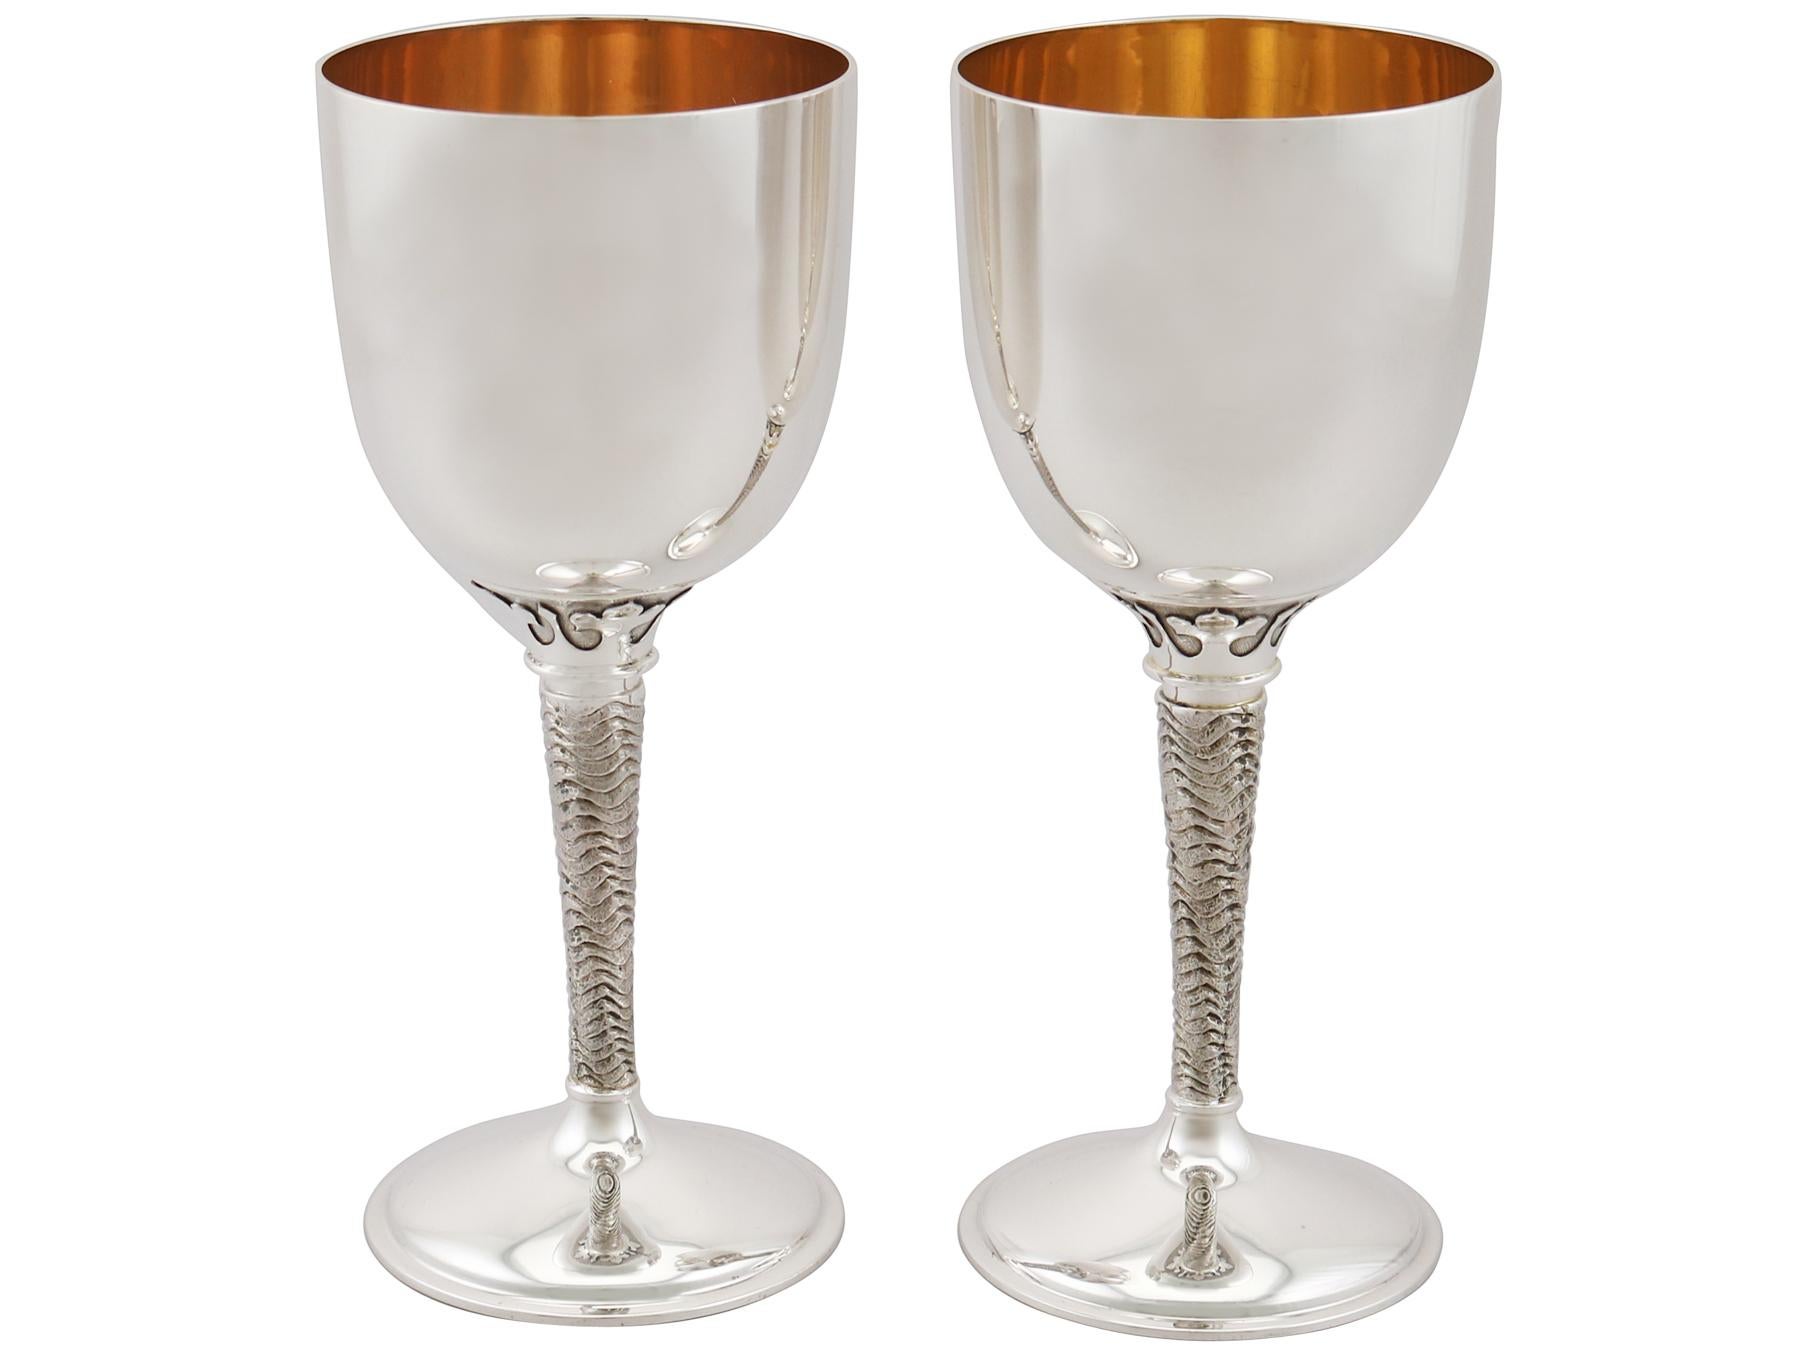 An exceptional, fine and impressive pair of vintage English sterling silver 'Bristol 600' goblets; an addition to our range of wine and drink related silverware.

These exceptional vintage silver goblets, in sterling standard, have a plain